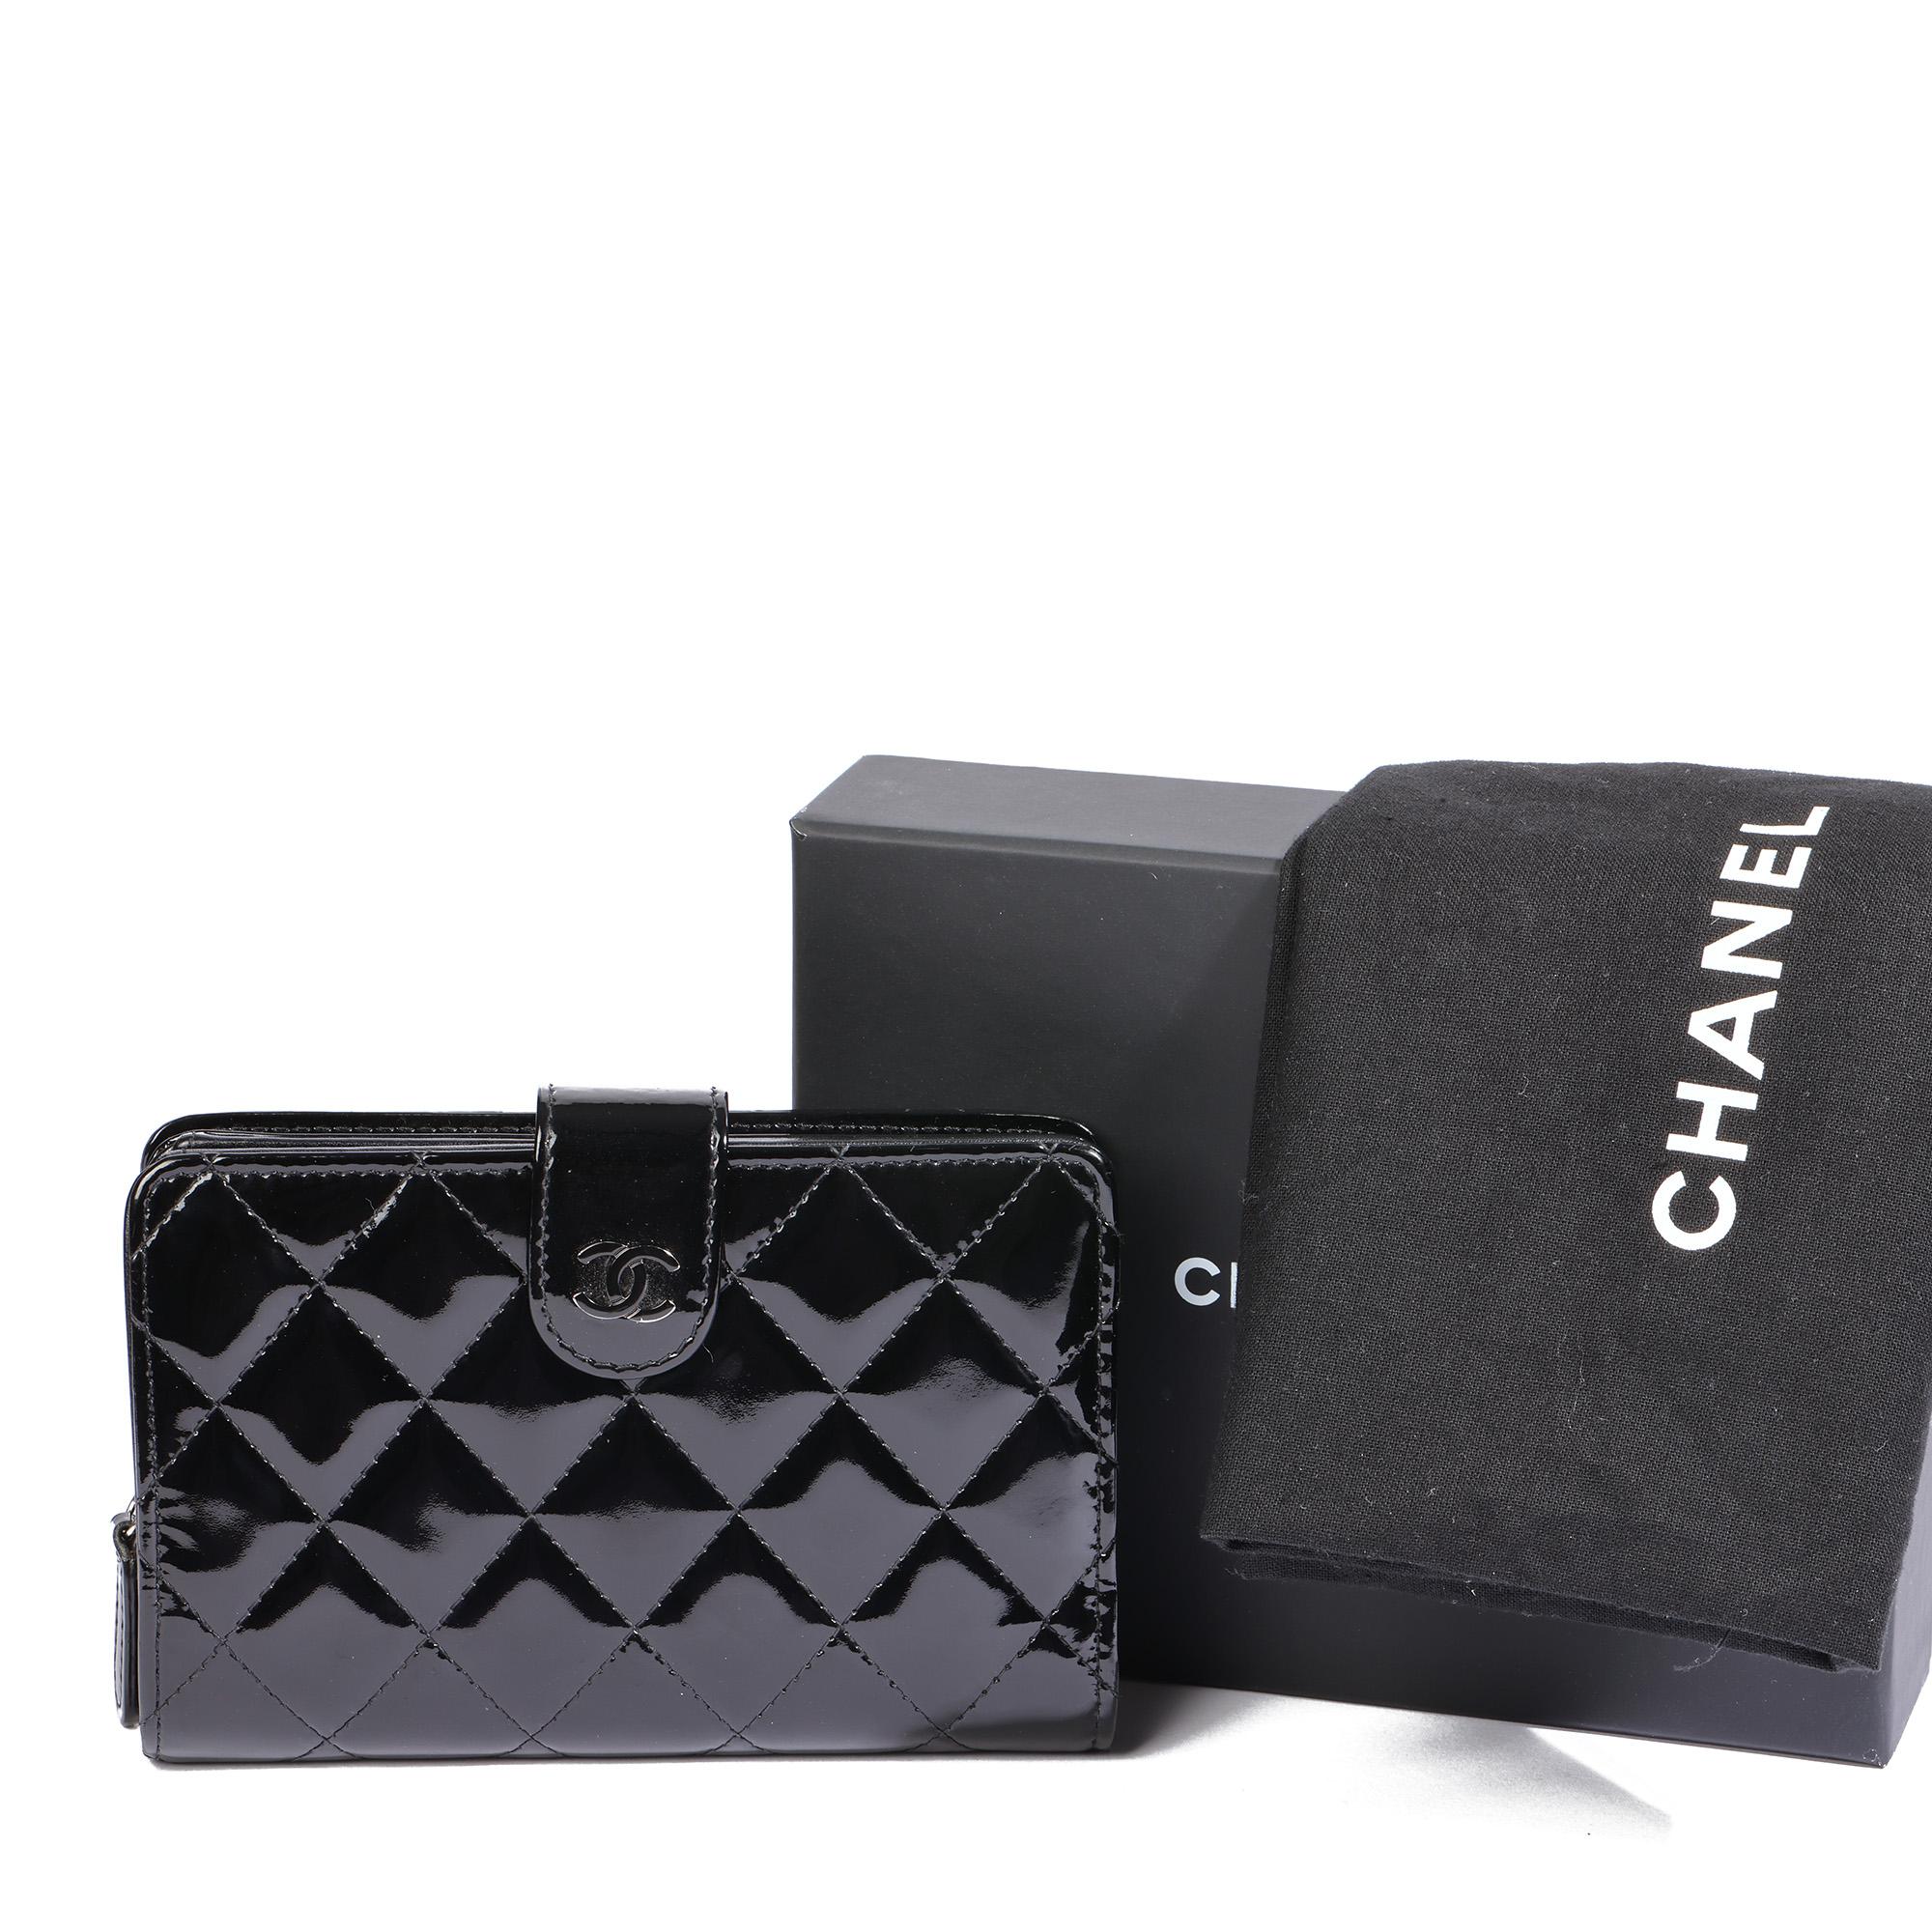 Chanel BLACK QUILTED PATENT LEATHER ZIP POCKET WALLET 2